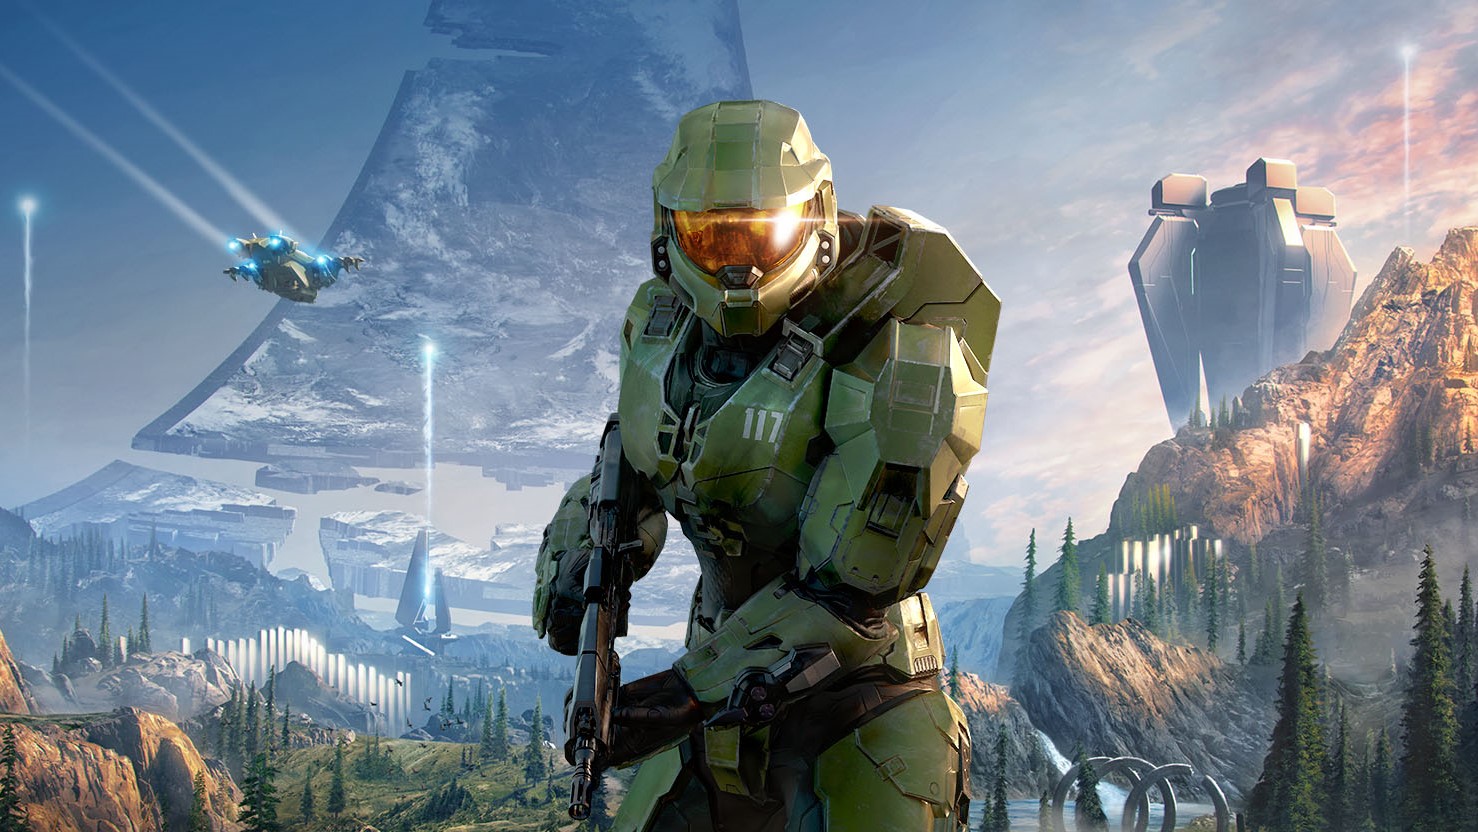 Xbox 20th Anniversary Recap, Halo Infinite Multiplayer Launched